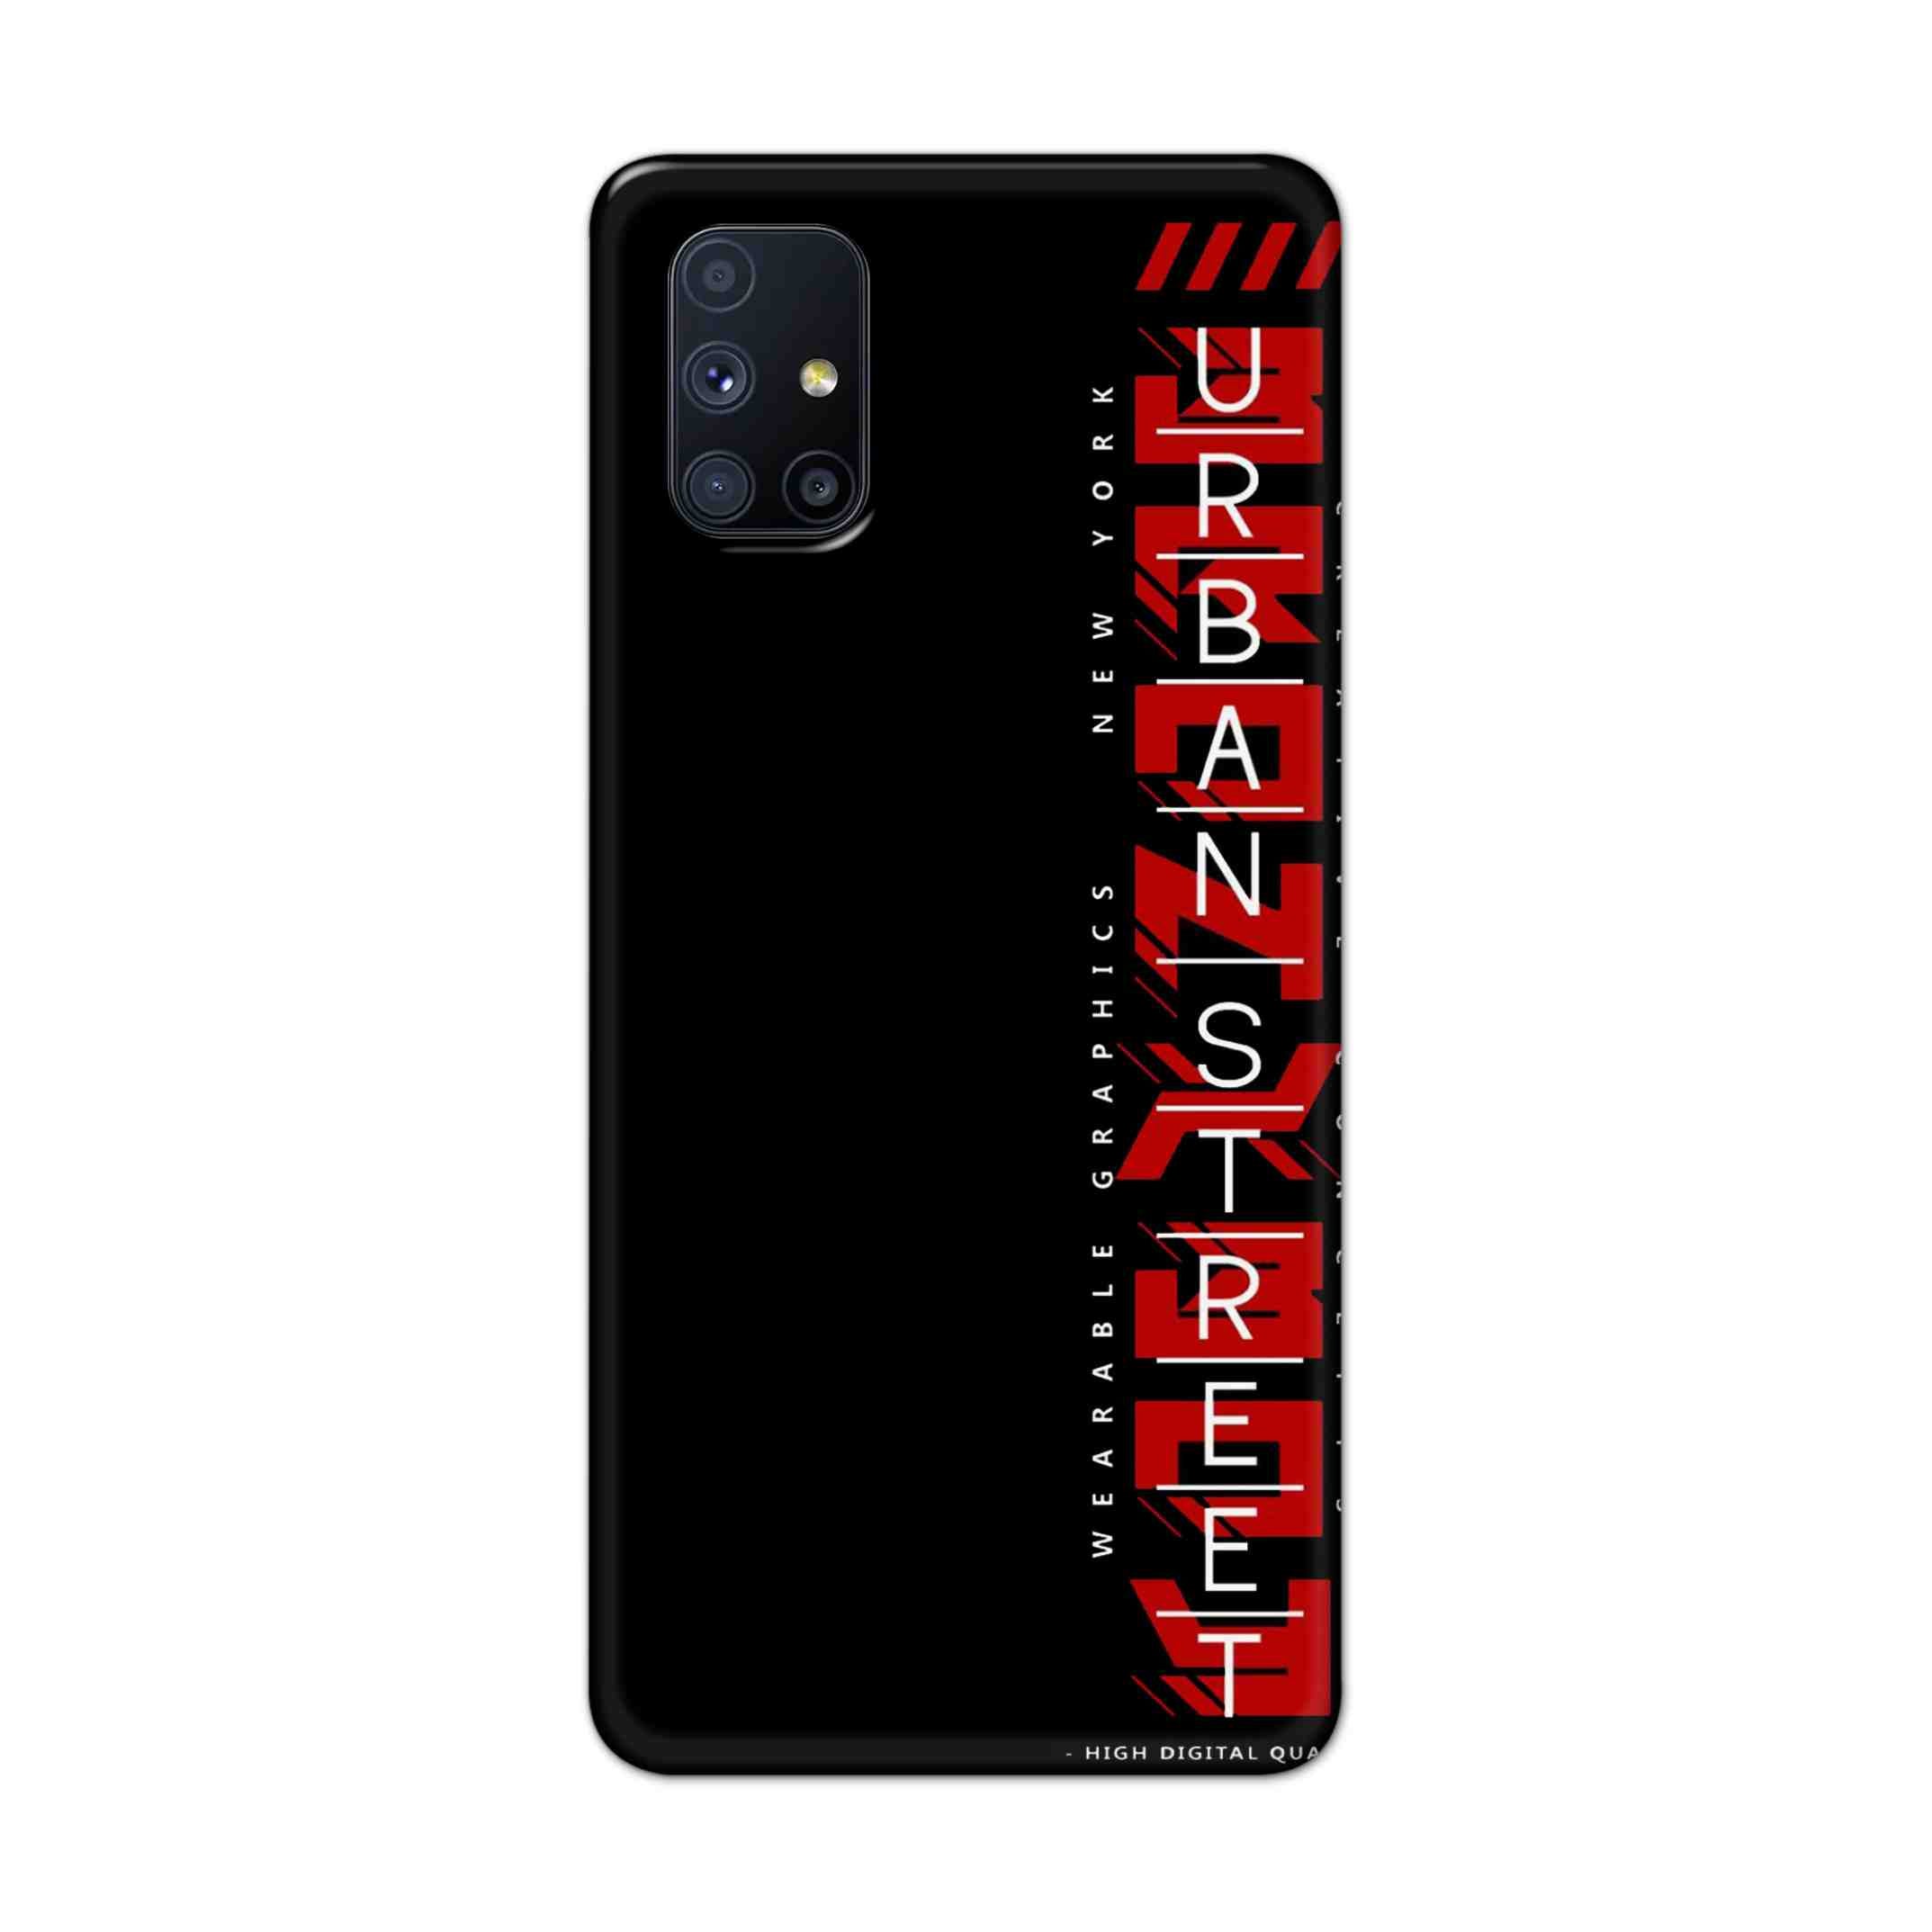 Buy Urban Street Hard Back Mobile Phone Case Cover For Samsung Galaxy M51 Online